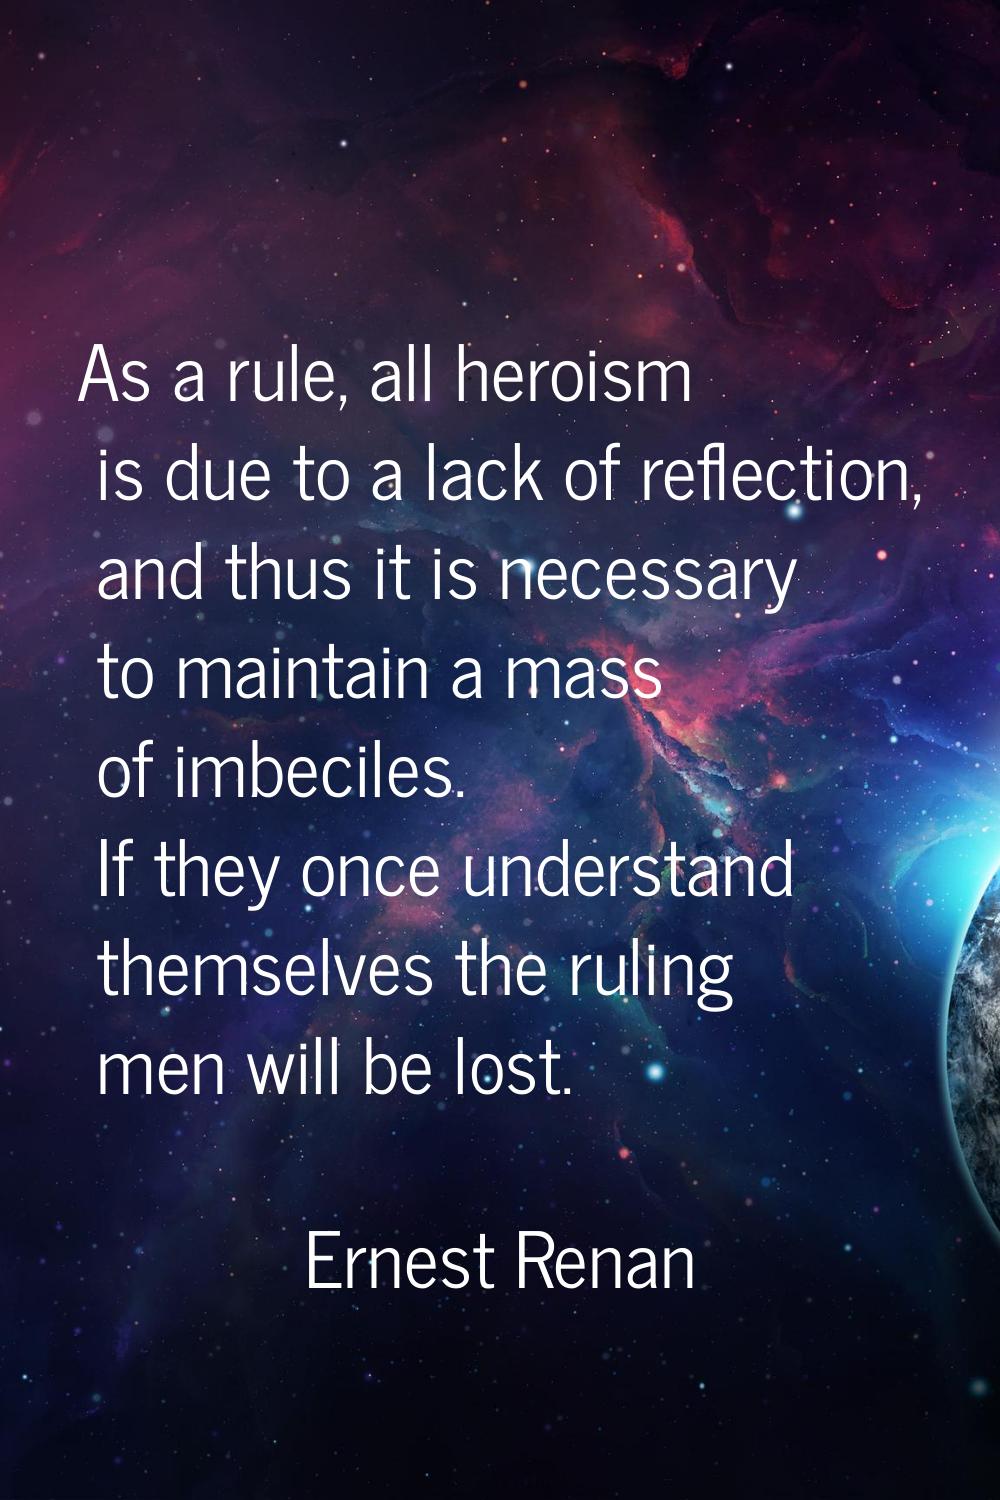 As a rule, all heroism is due to a lack of reflection, and thus it is necessary to maintain a mass 